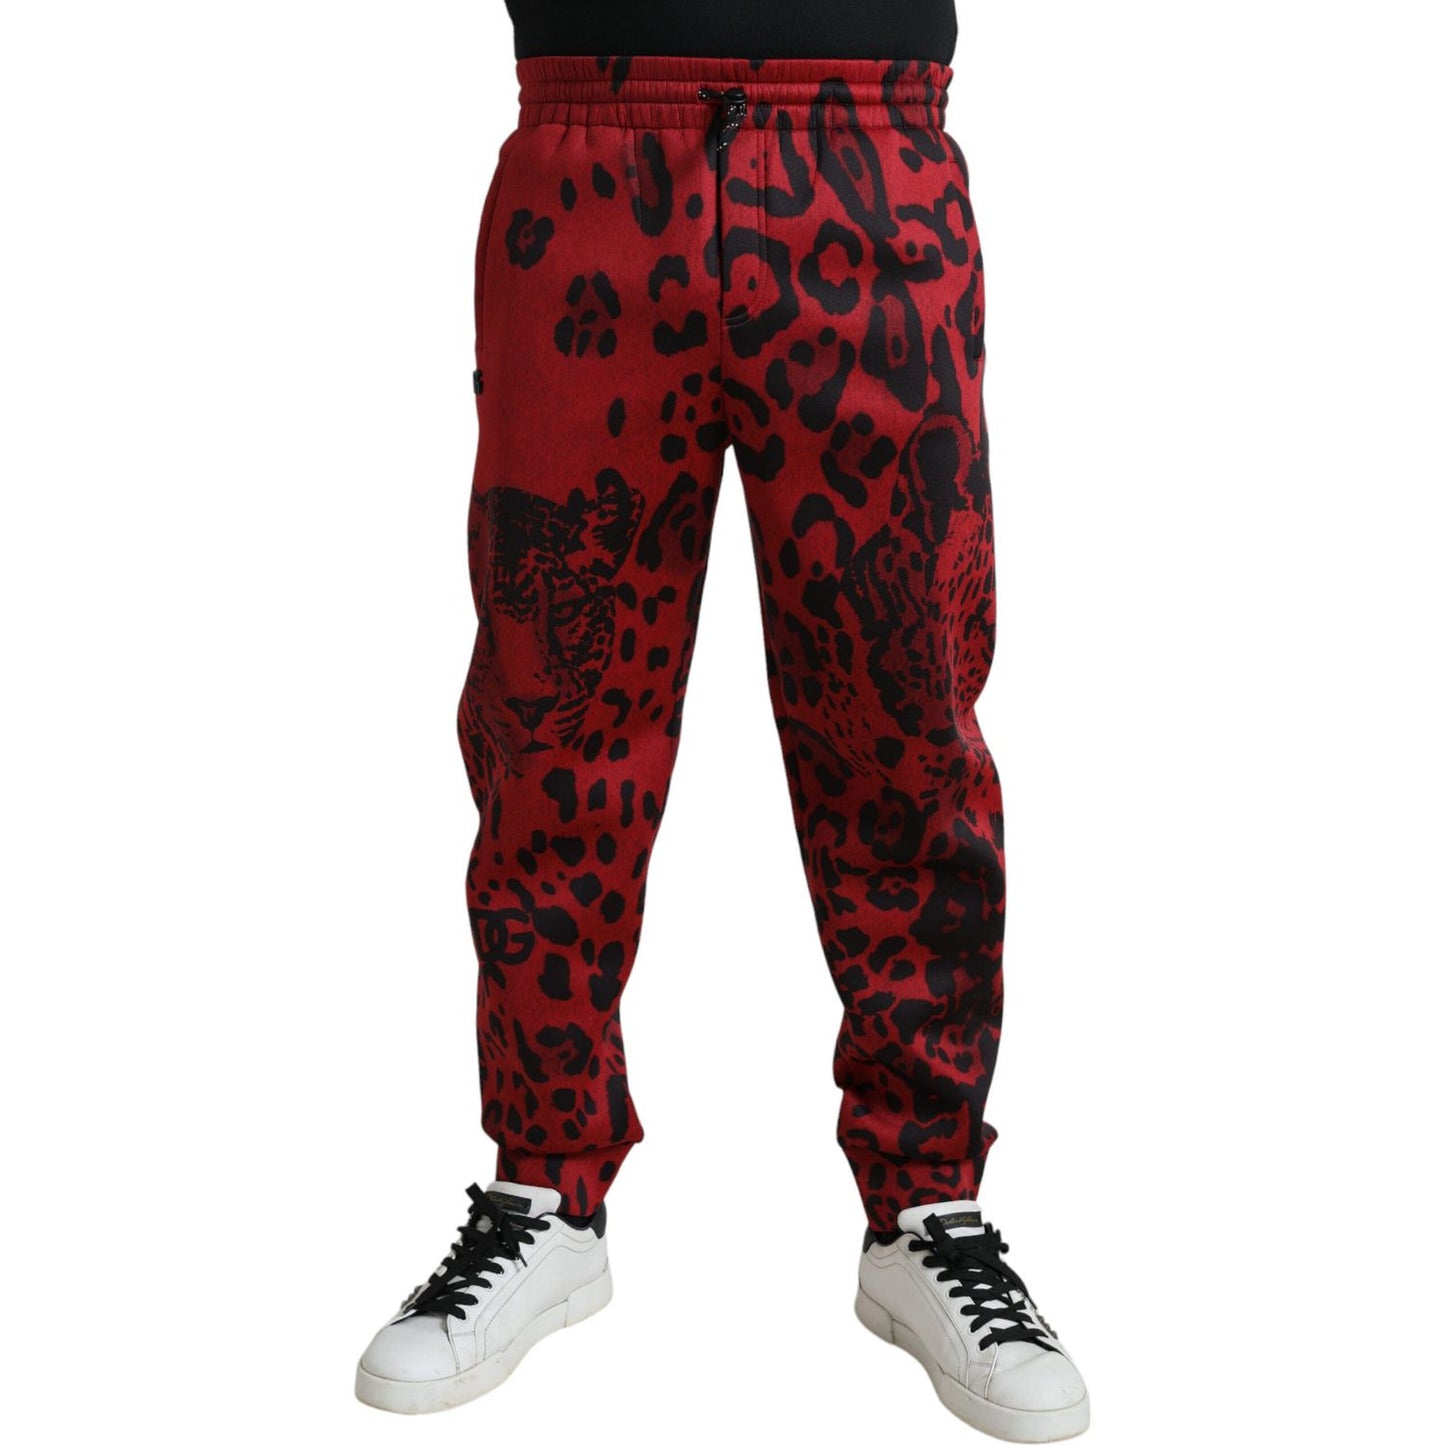 Dolce & Gabbana Elegant Leopard Print Joggers in Red and Black red-black-leopard-stretch-jogger-pants